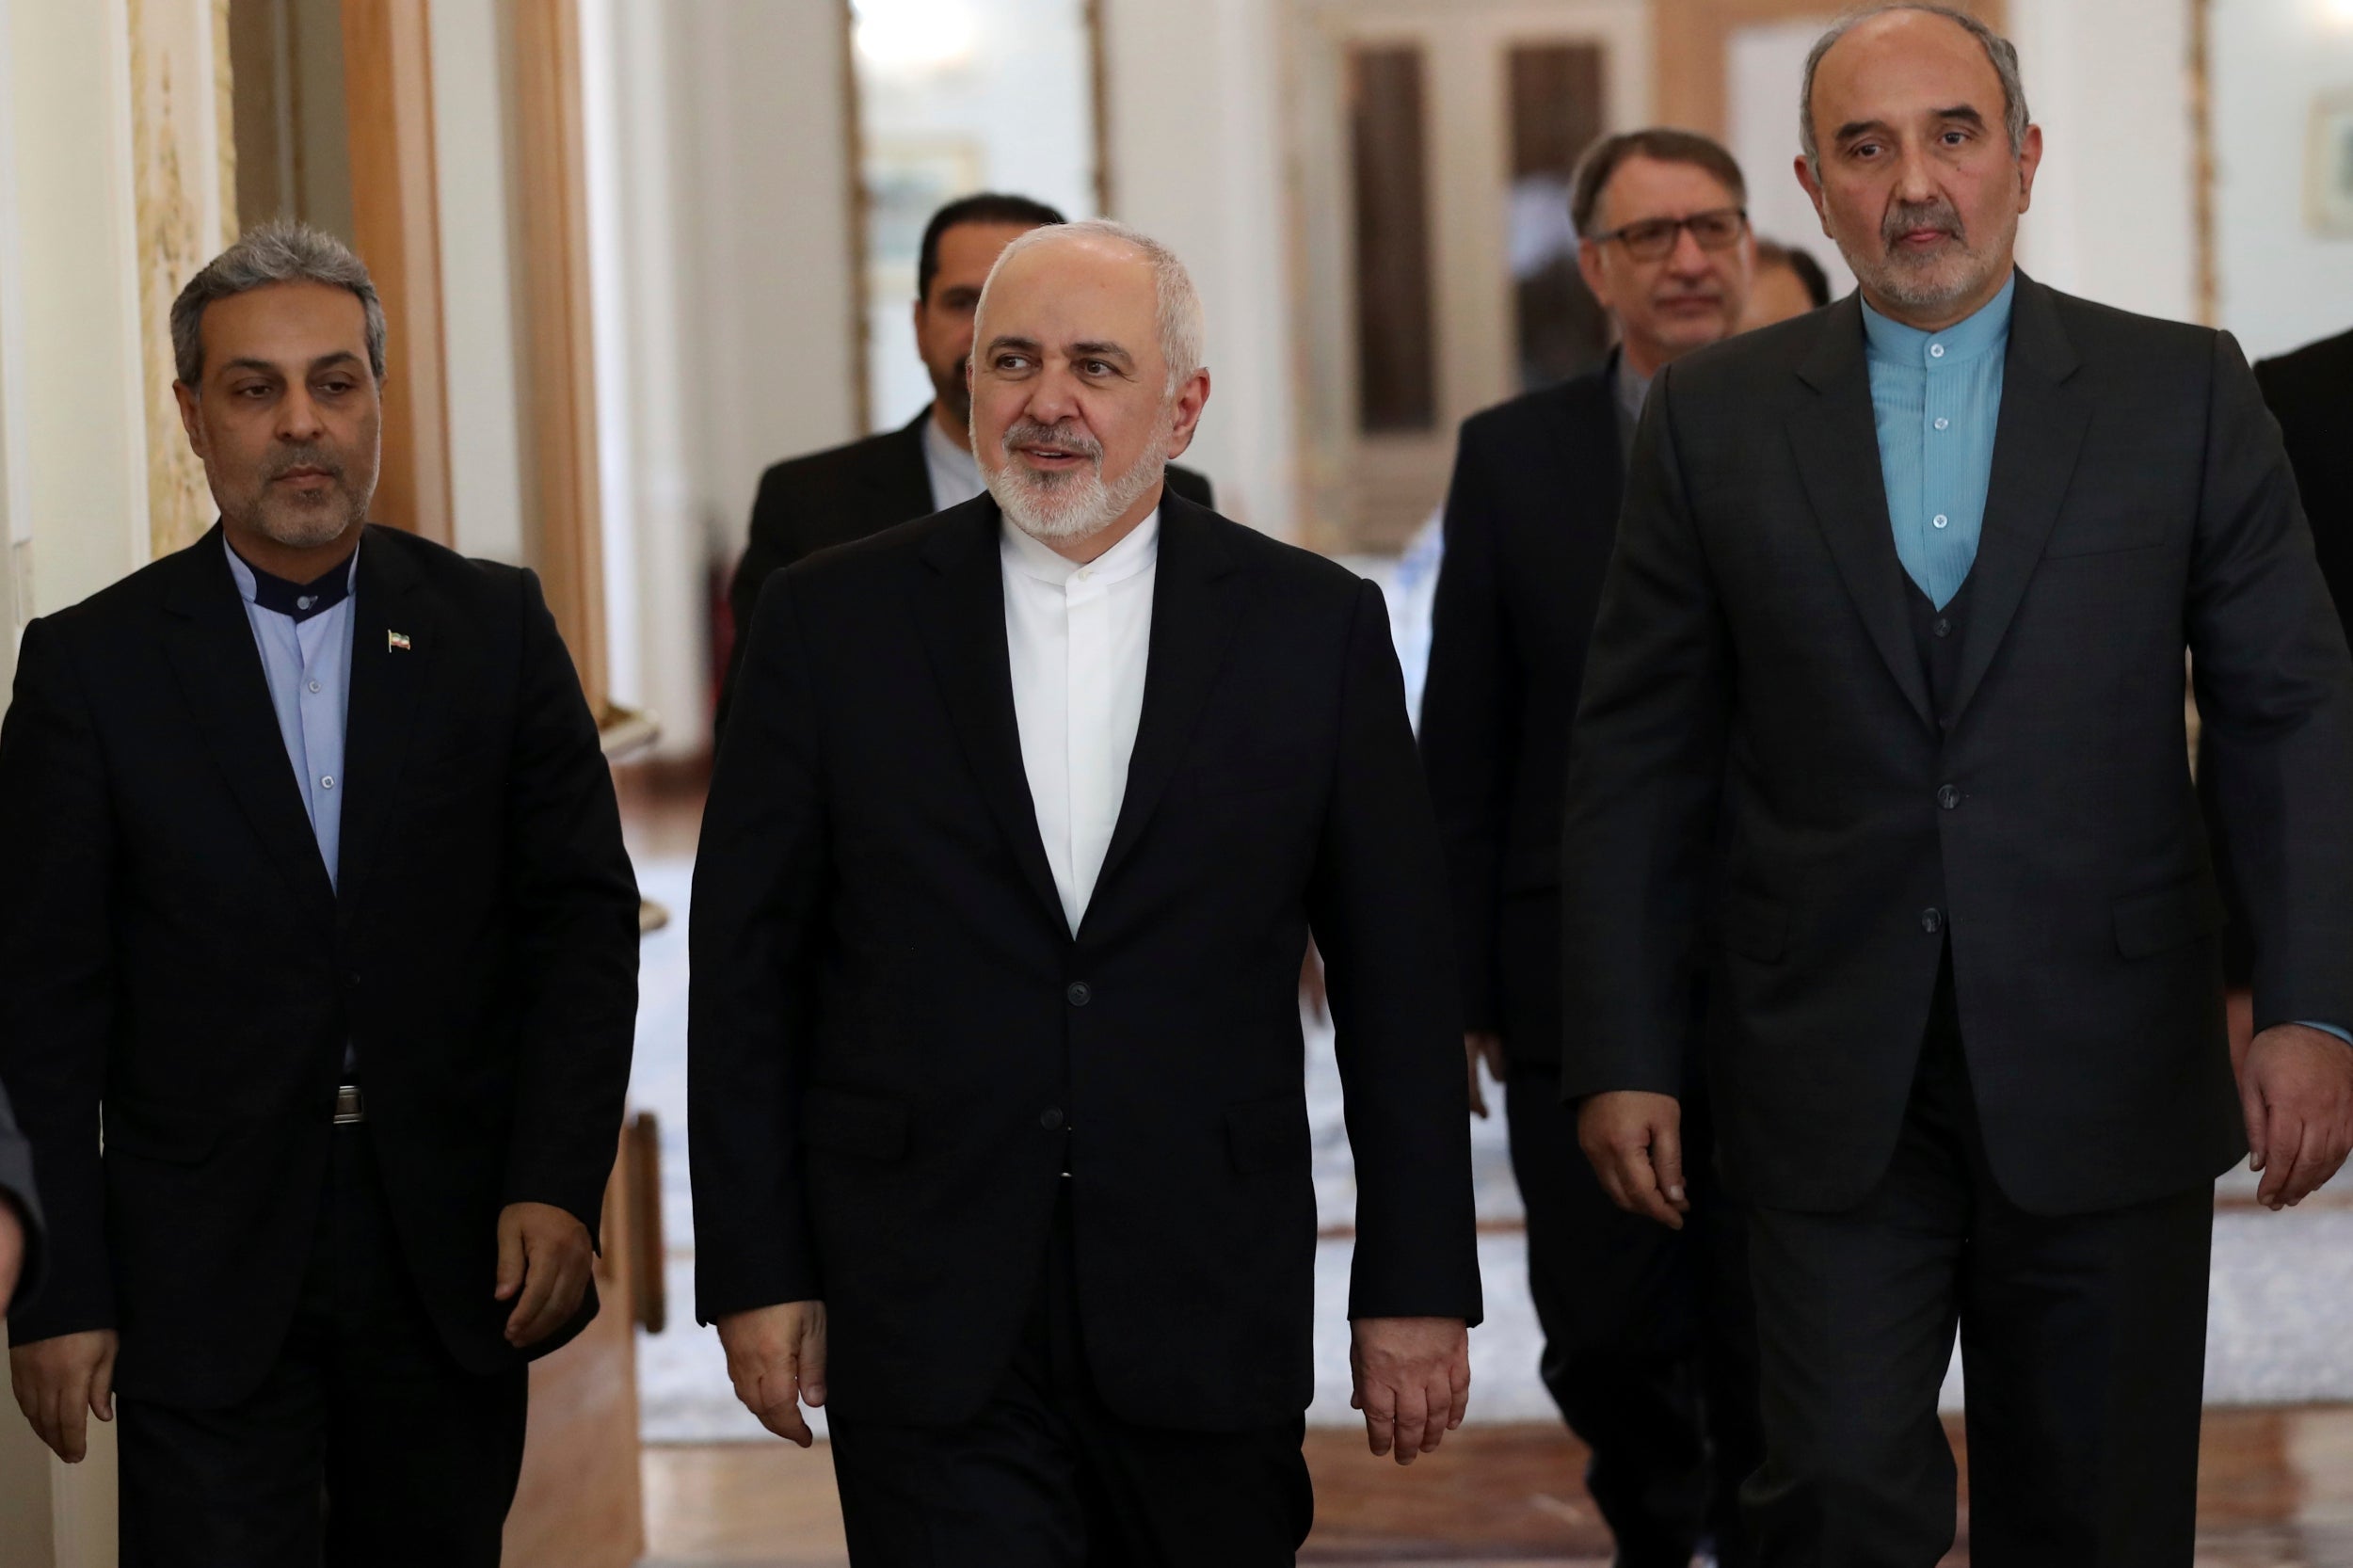 Foreign minister Mohammad Javad Zarif (centre) arrives prior to a meeting with his Venezuelan counterpart in Tehran